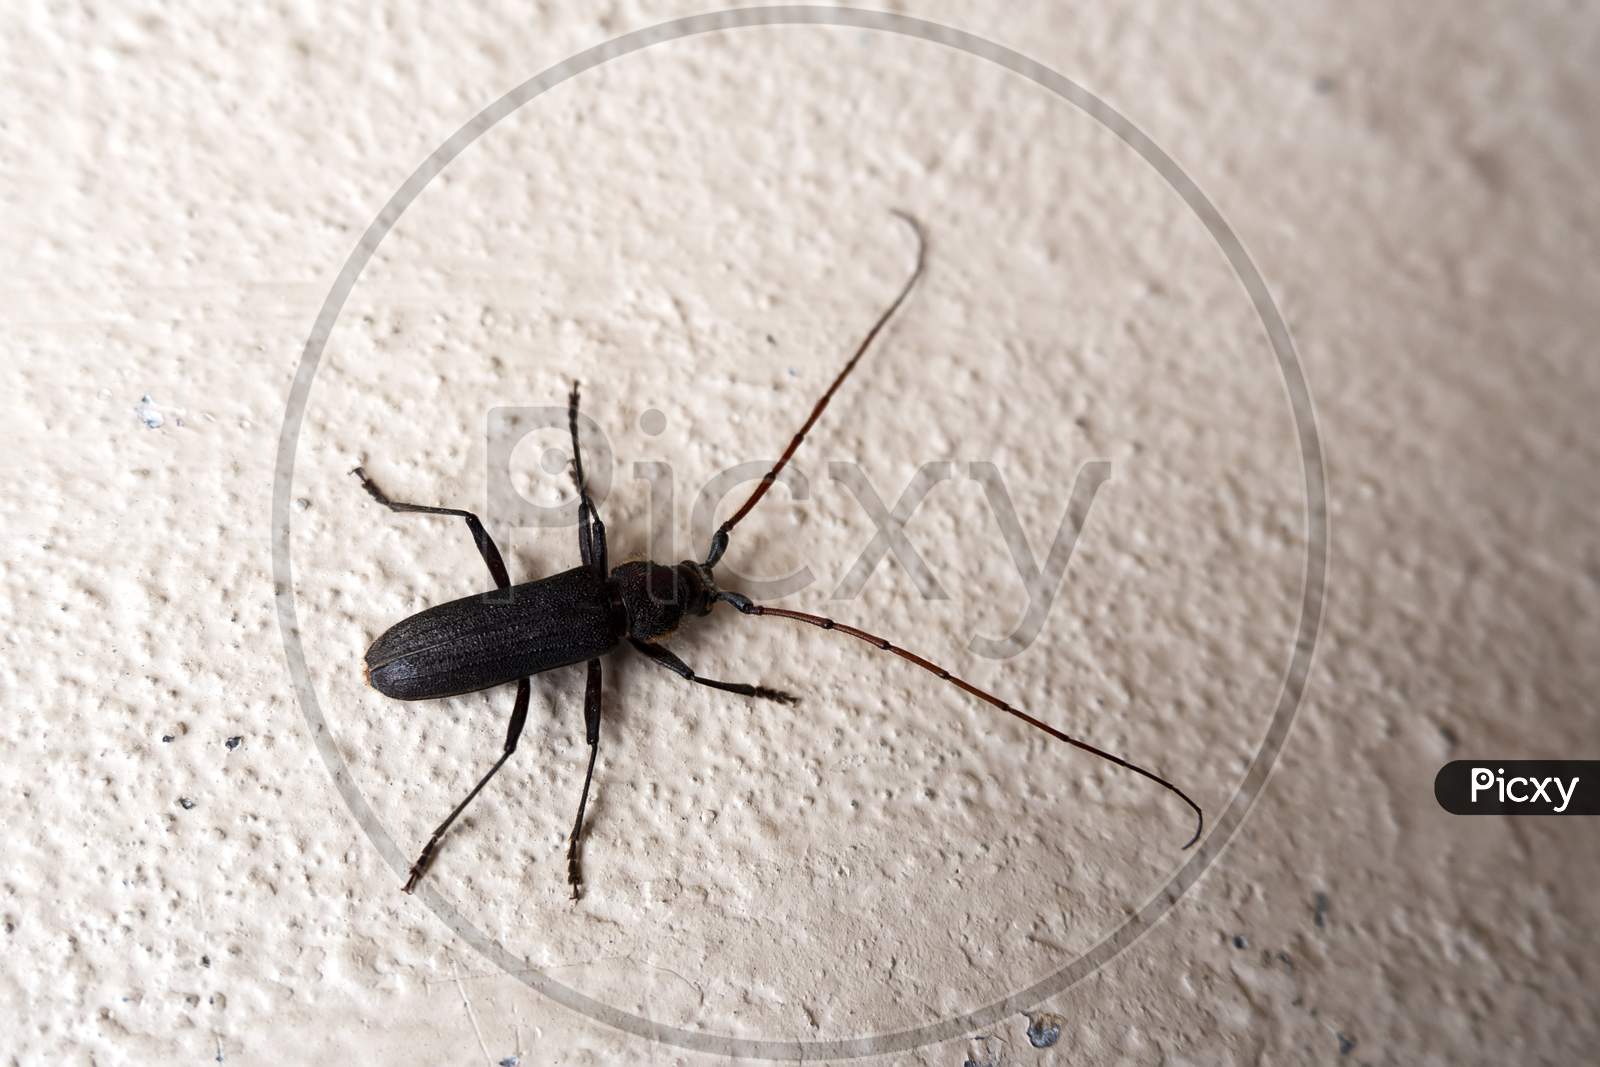 Brown Long-Horned Beetle Isolated On Wall